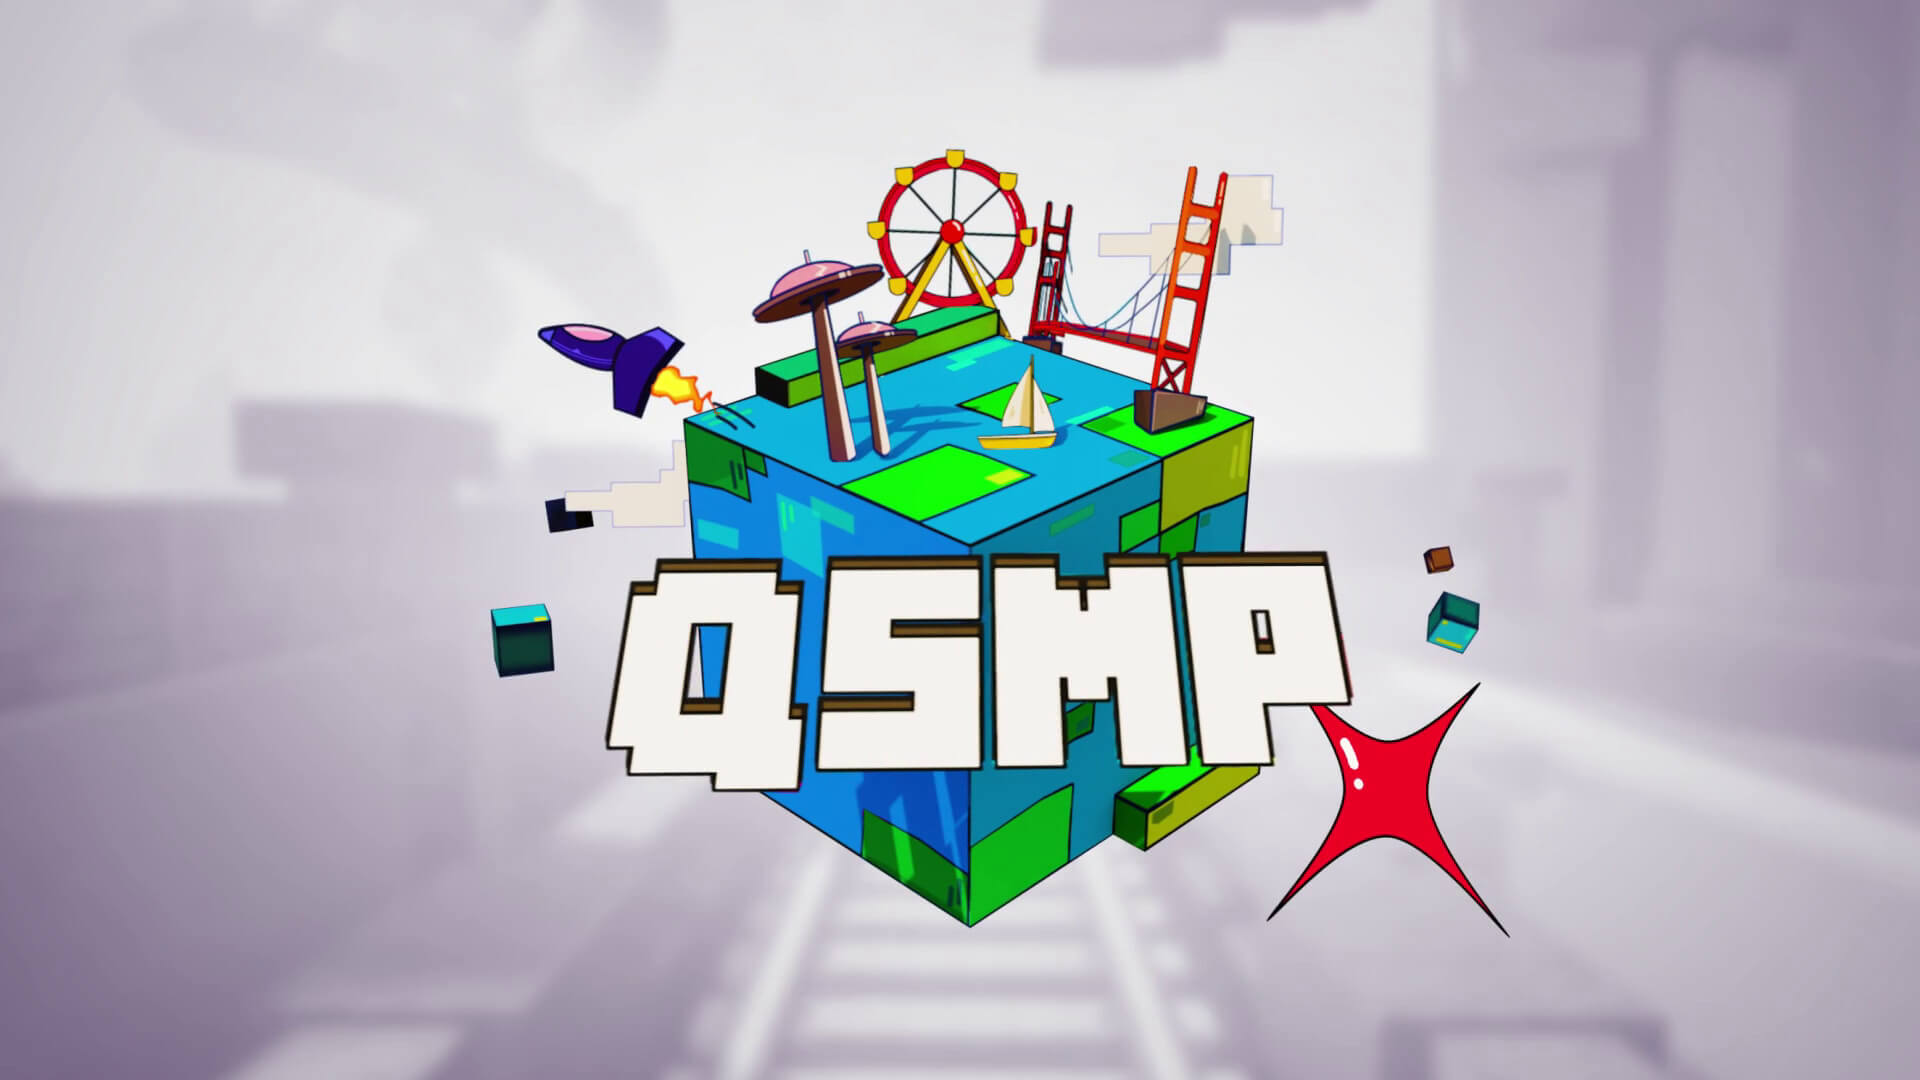 WELCOME TO THE QSMP, WILLYREX AND TUBBO : r/Qsmp